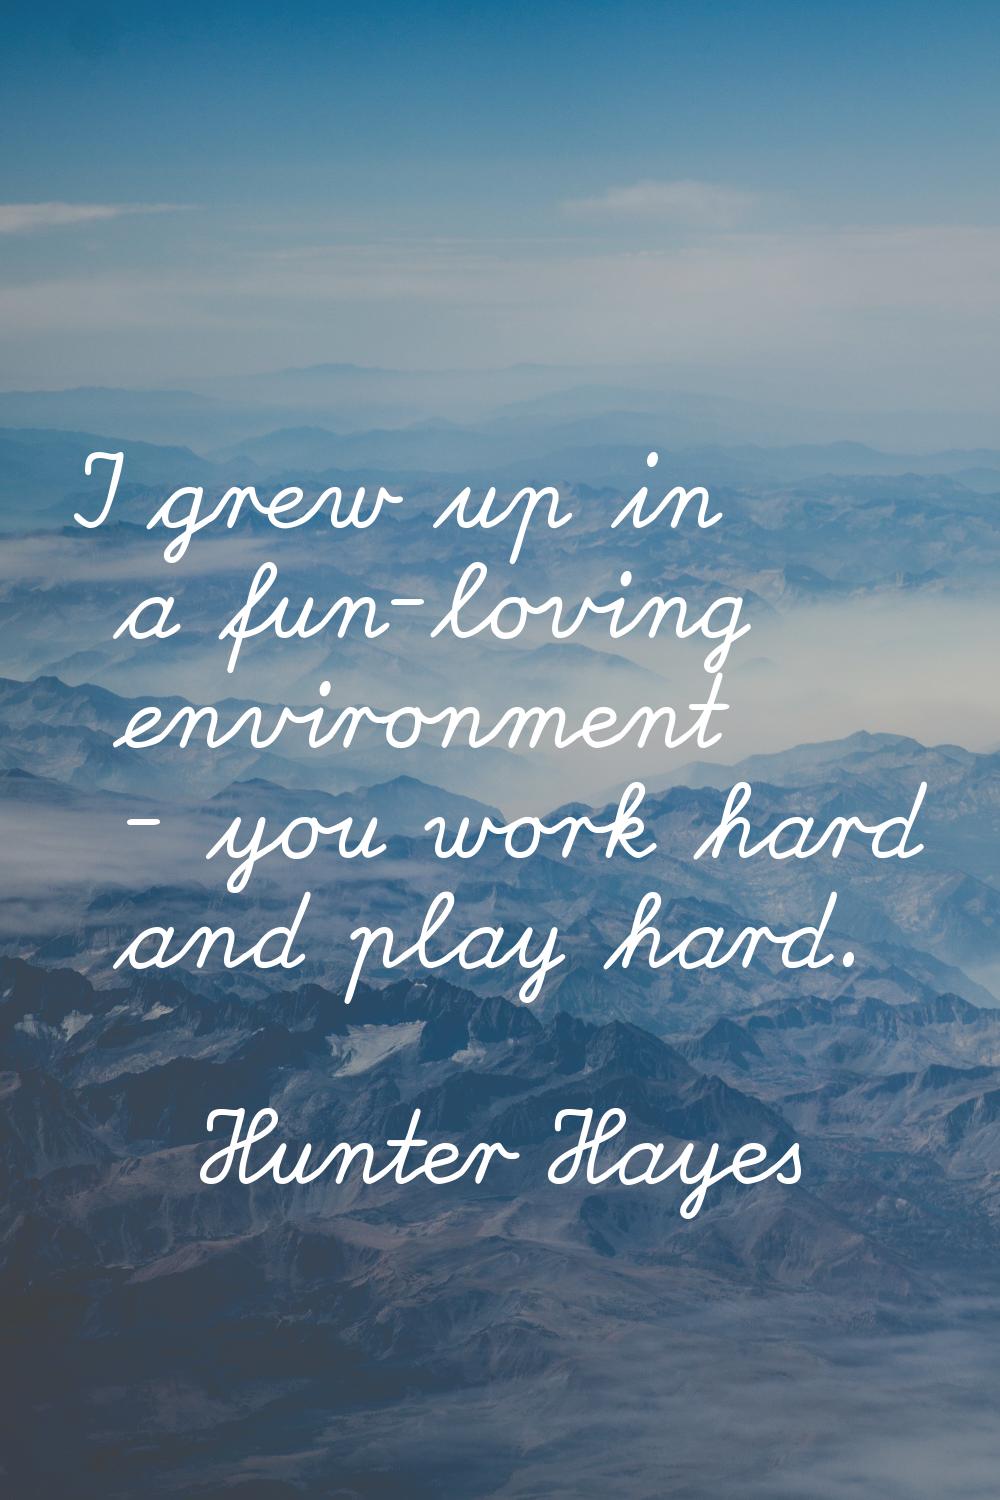 I grew up in a fun-loving environment - you work hard and play hard.